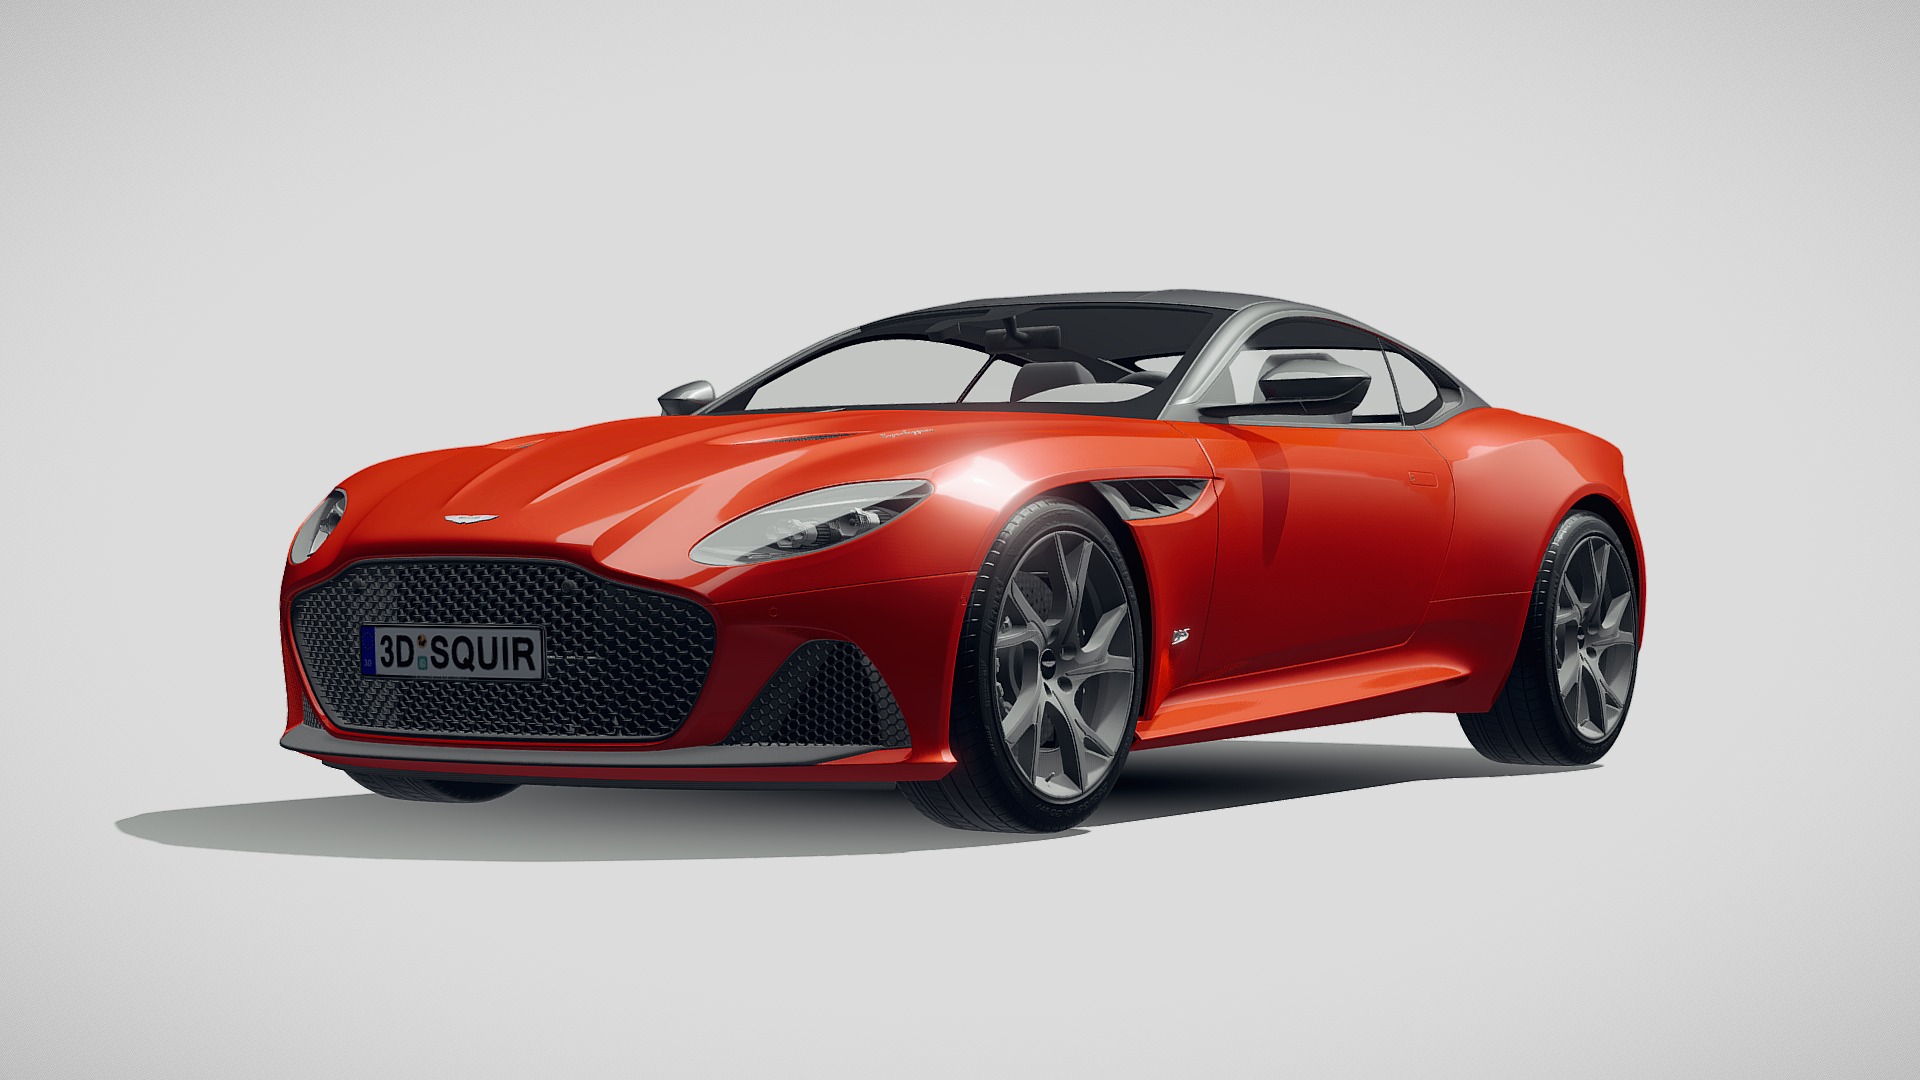 3D model Aston Martin DBS Superleggera 2019 - This is a 3D model of the Aston Martin DBS Superleggera 2019. The 3D model is about a red sports car.